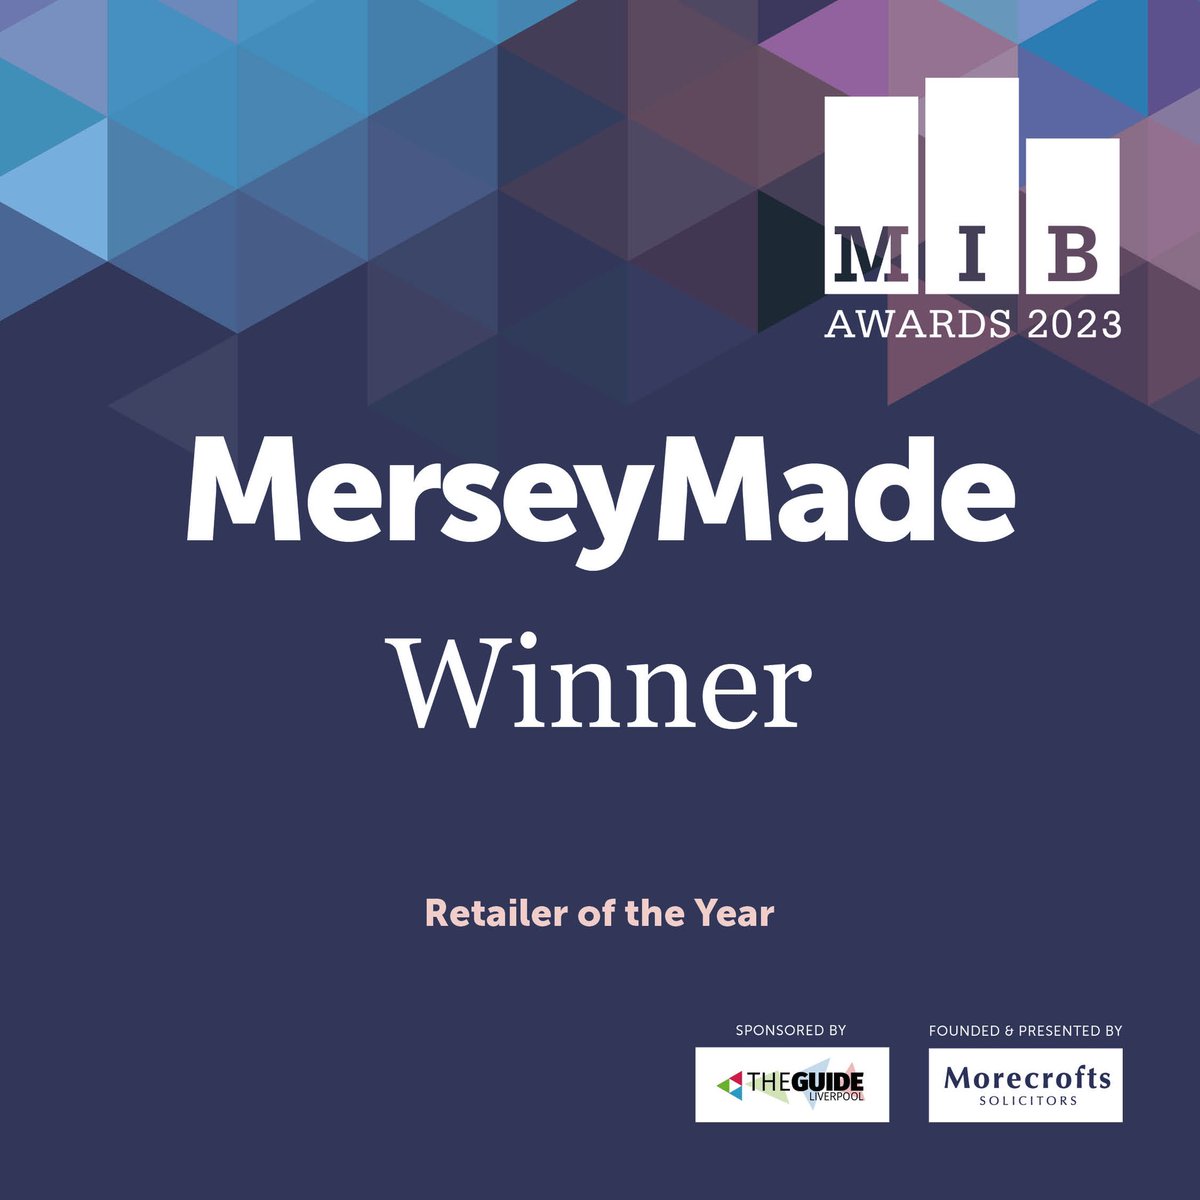 The Retailer of the Year at the 2023 MIB Awards is @Merseymadeuk – winners in this category for the second year running.  A tremendous well done to Merseymade for creating a unique creative hub for local makers. #MIB23 #MIBWinners